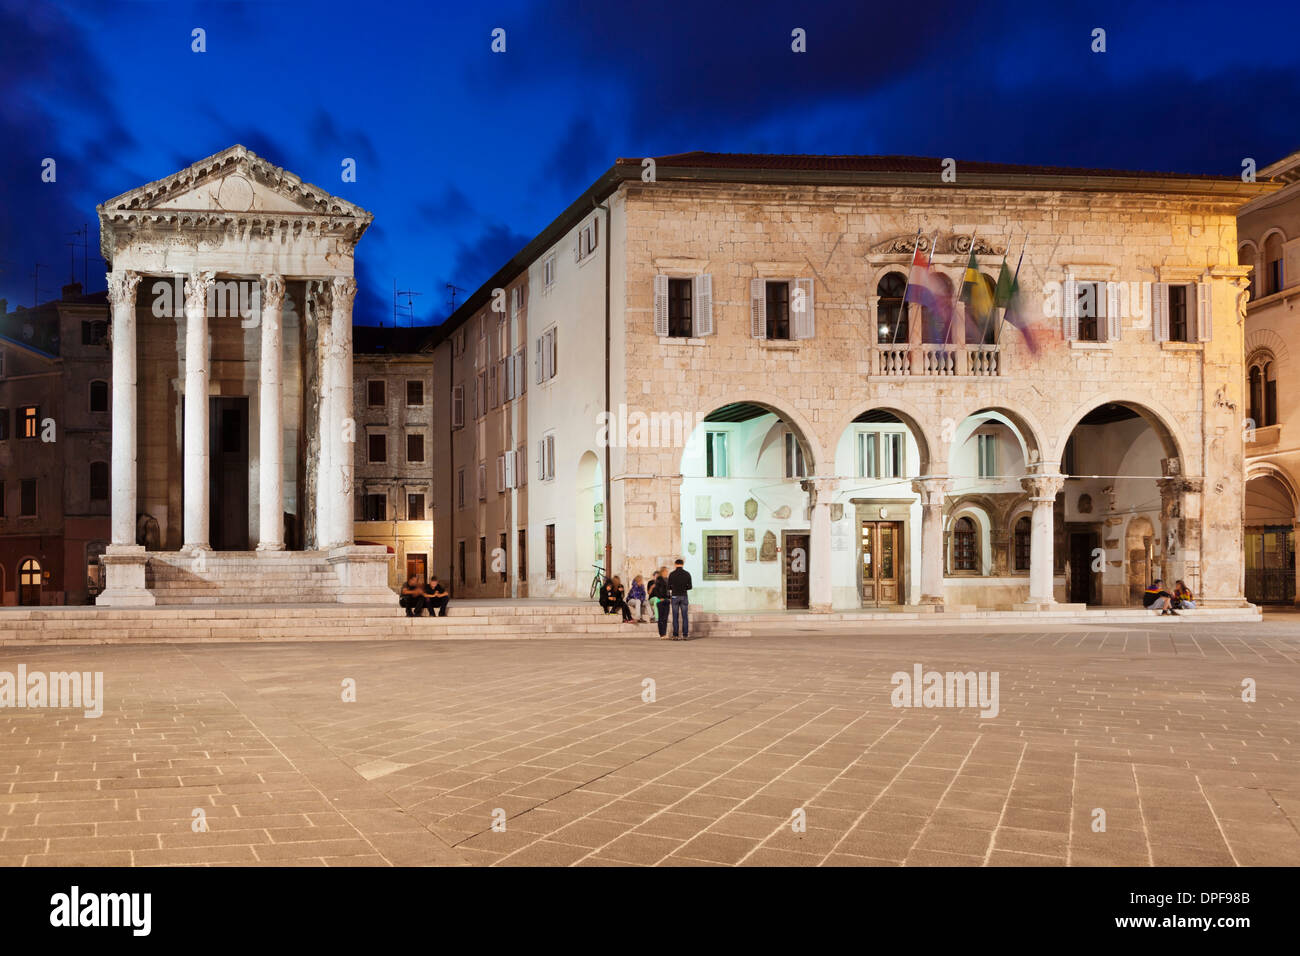 Illuminated Temple of Augustus and town hall on the marketplace in the old town at night, Pula, Istria, Croatia, Europe Stock Photo